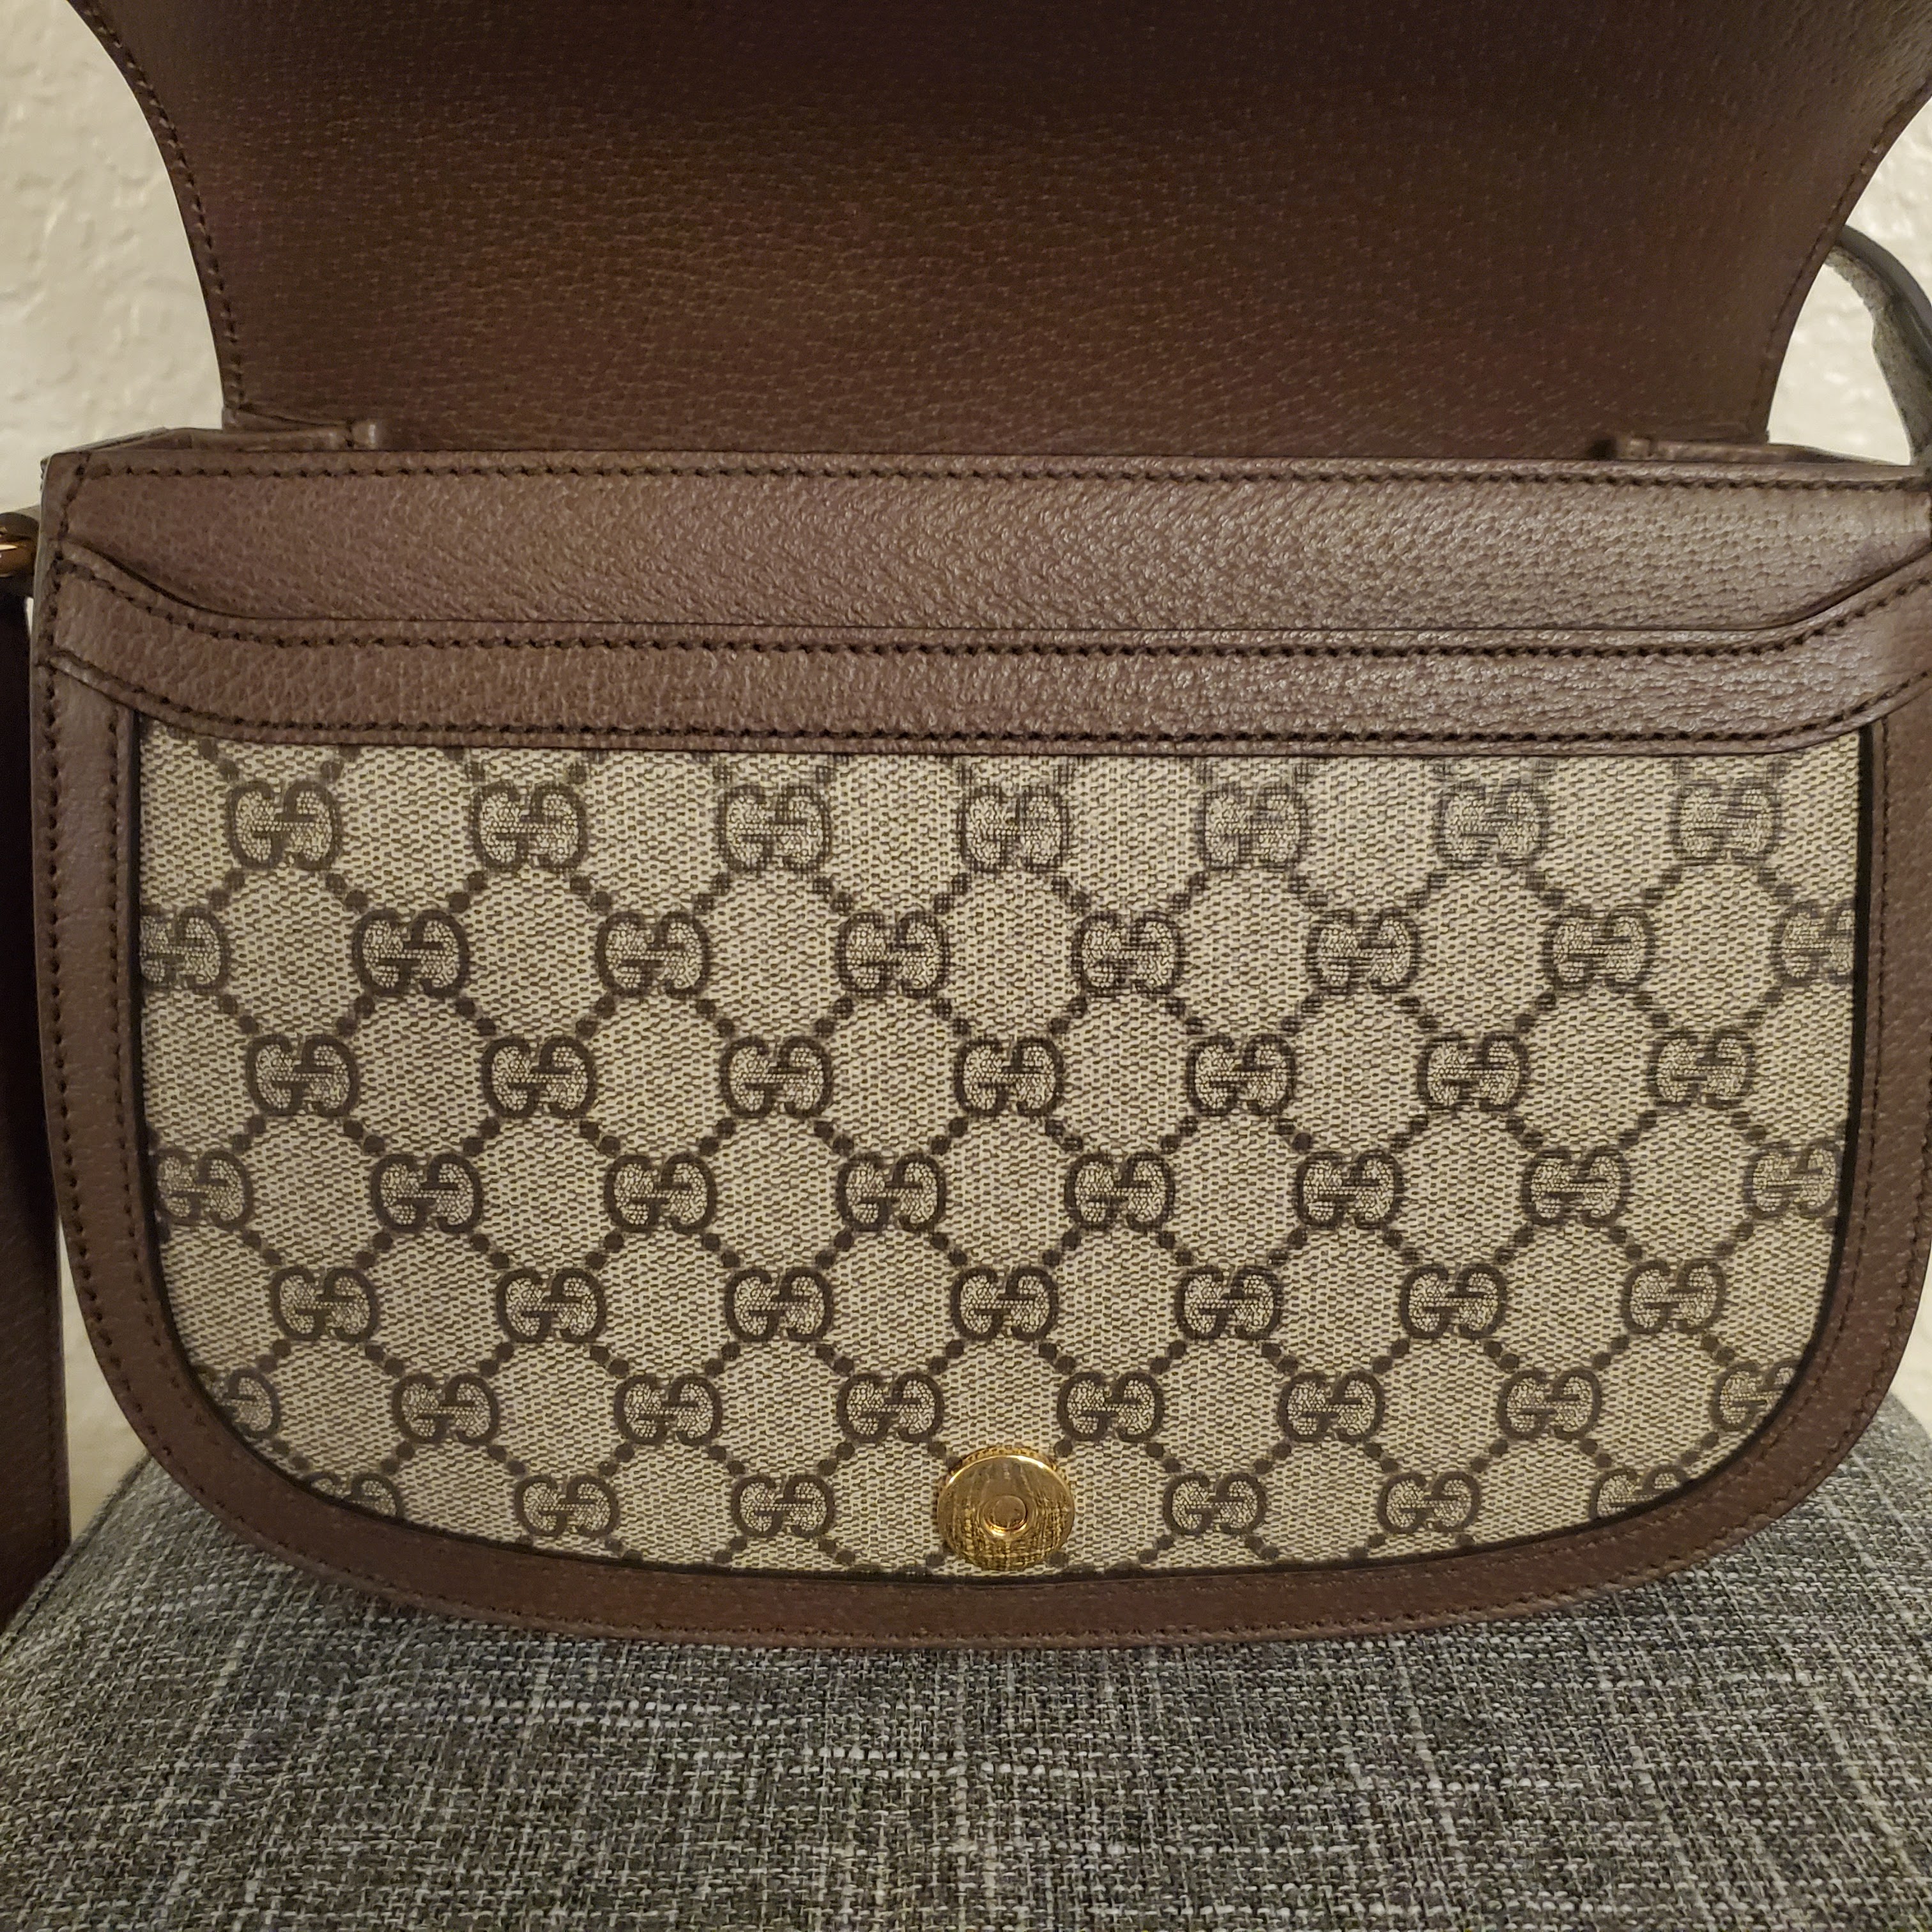 MY GUCCI SMALL OPHIDIA GG SHOULDER BAG REVIEW! 😱 AMAZING OR A PAIN TO USE?